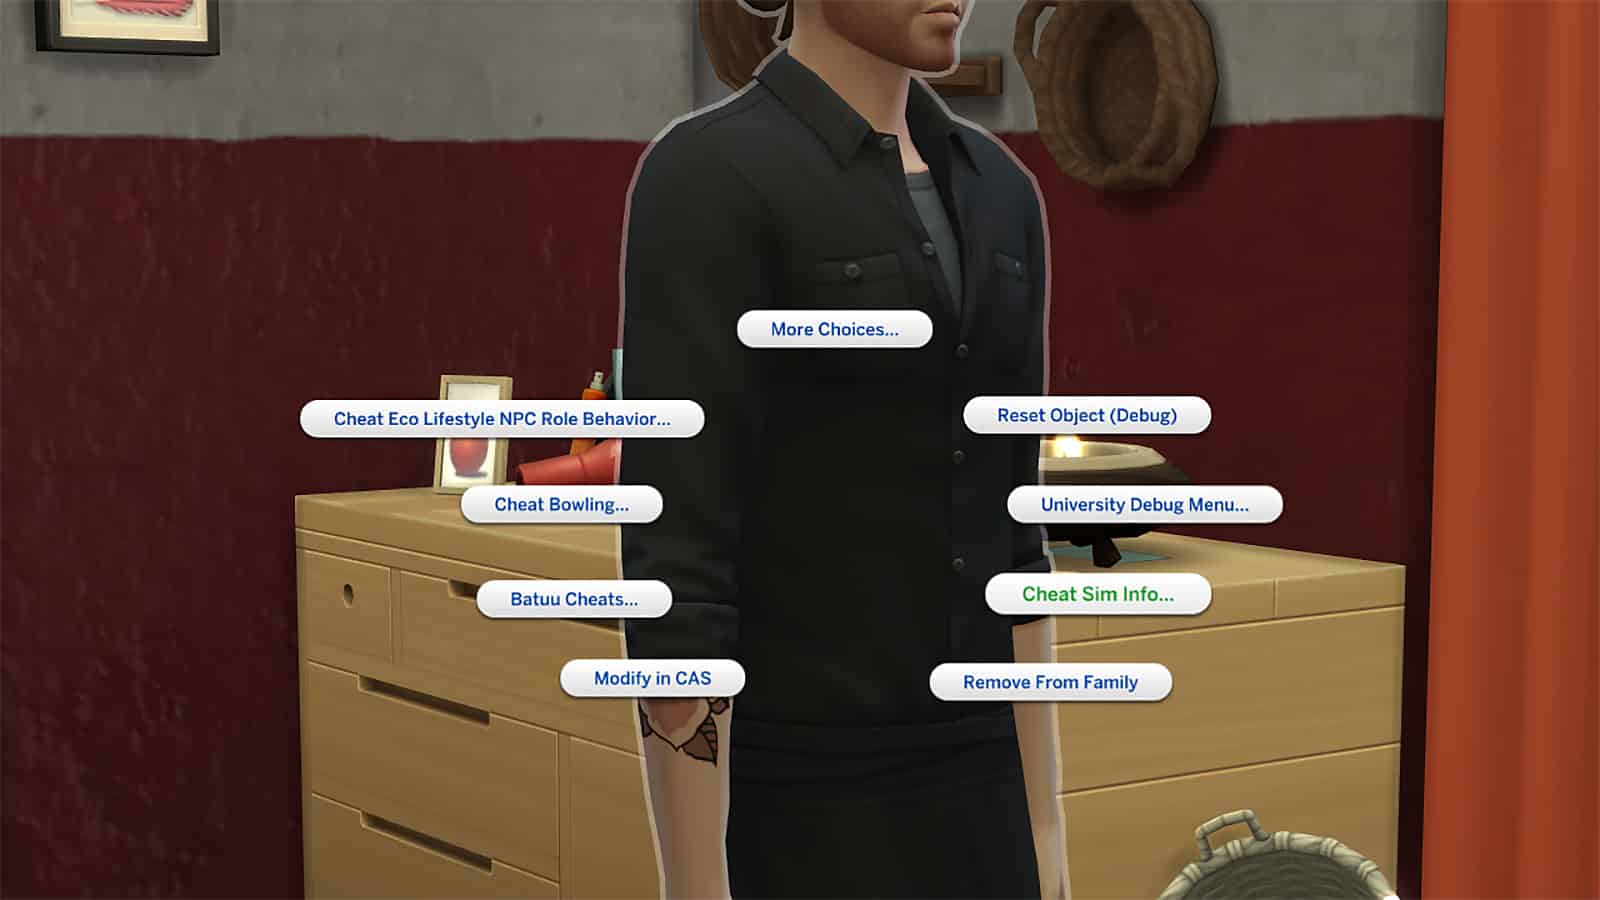 The Sims 4 Cheats: Full List of Essential Cheats